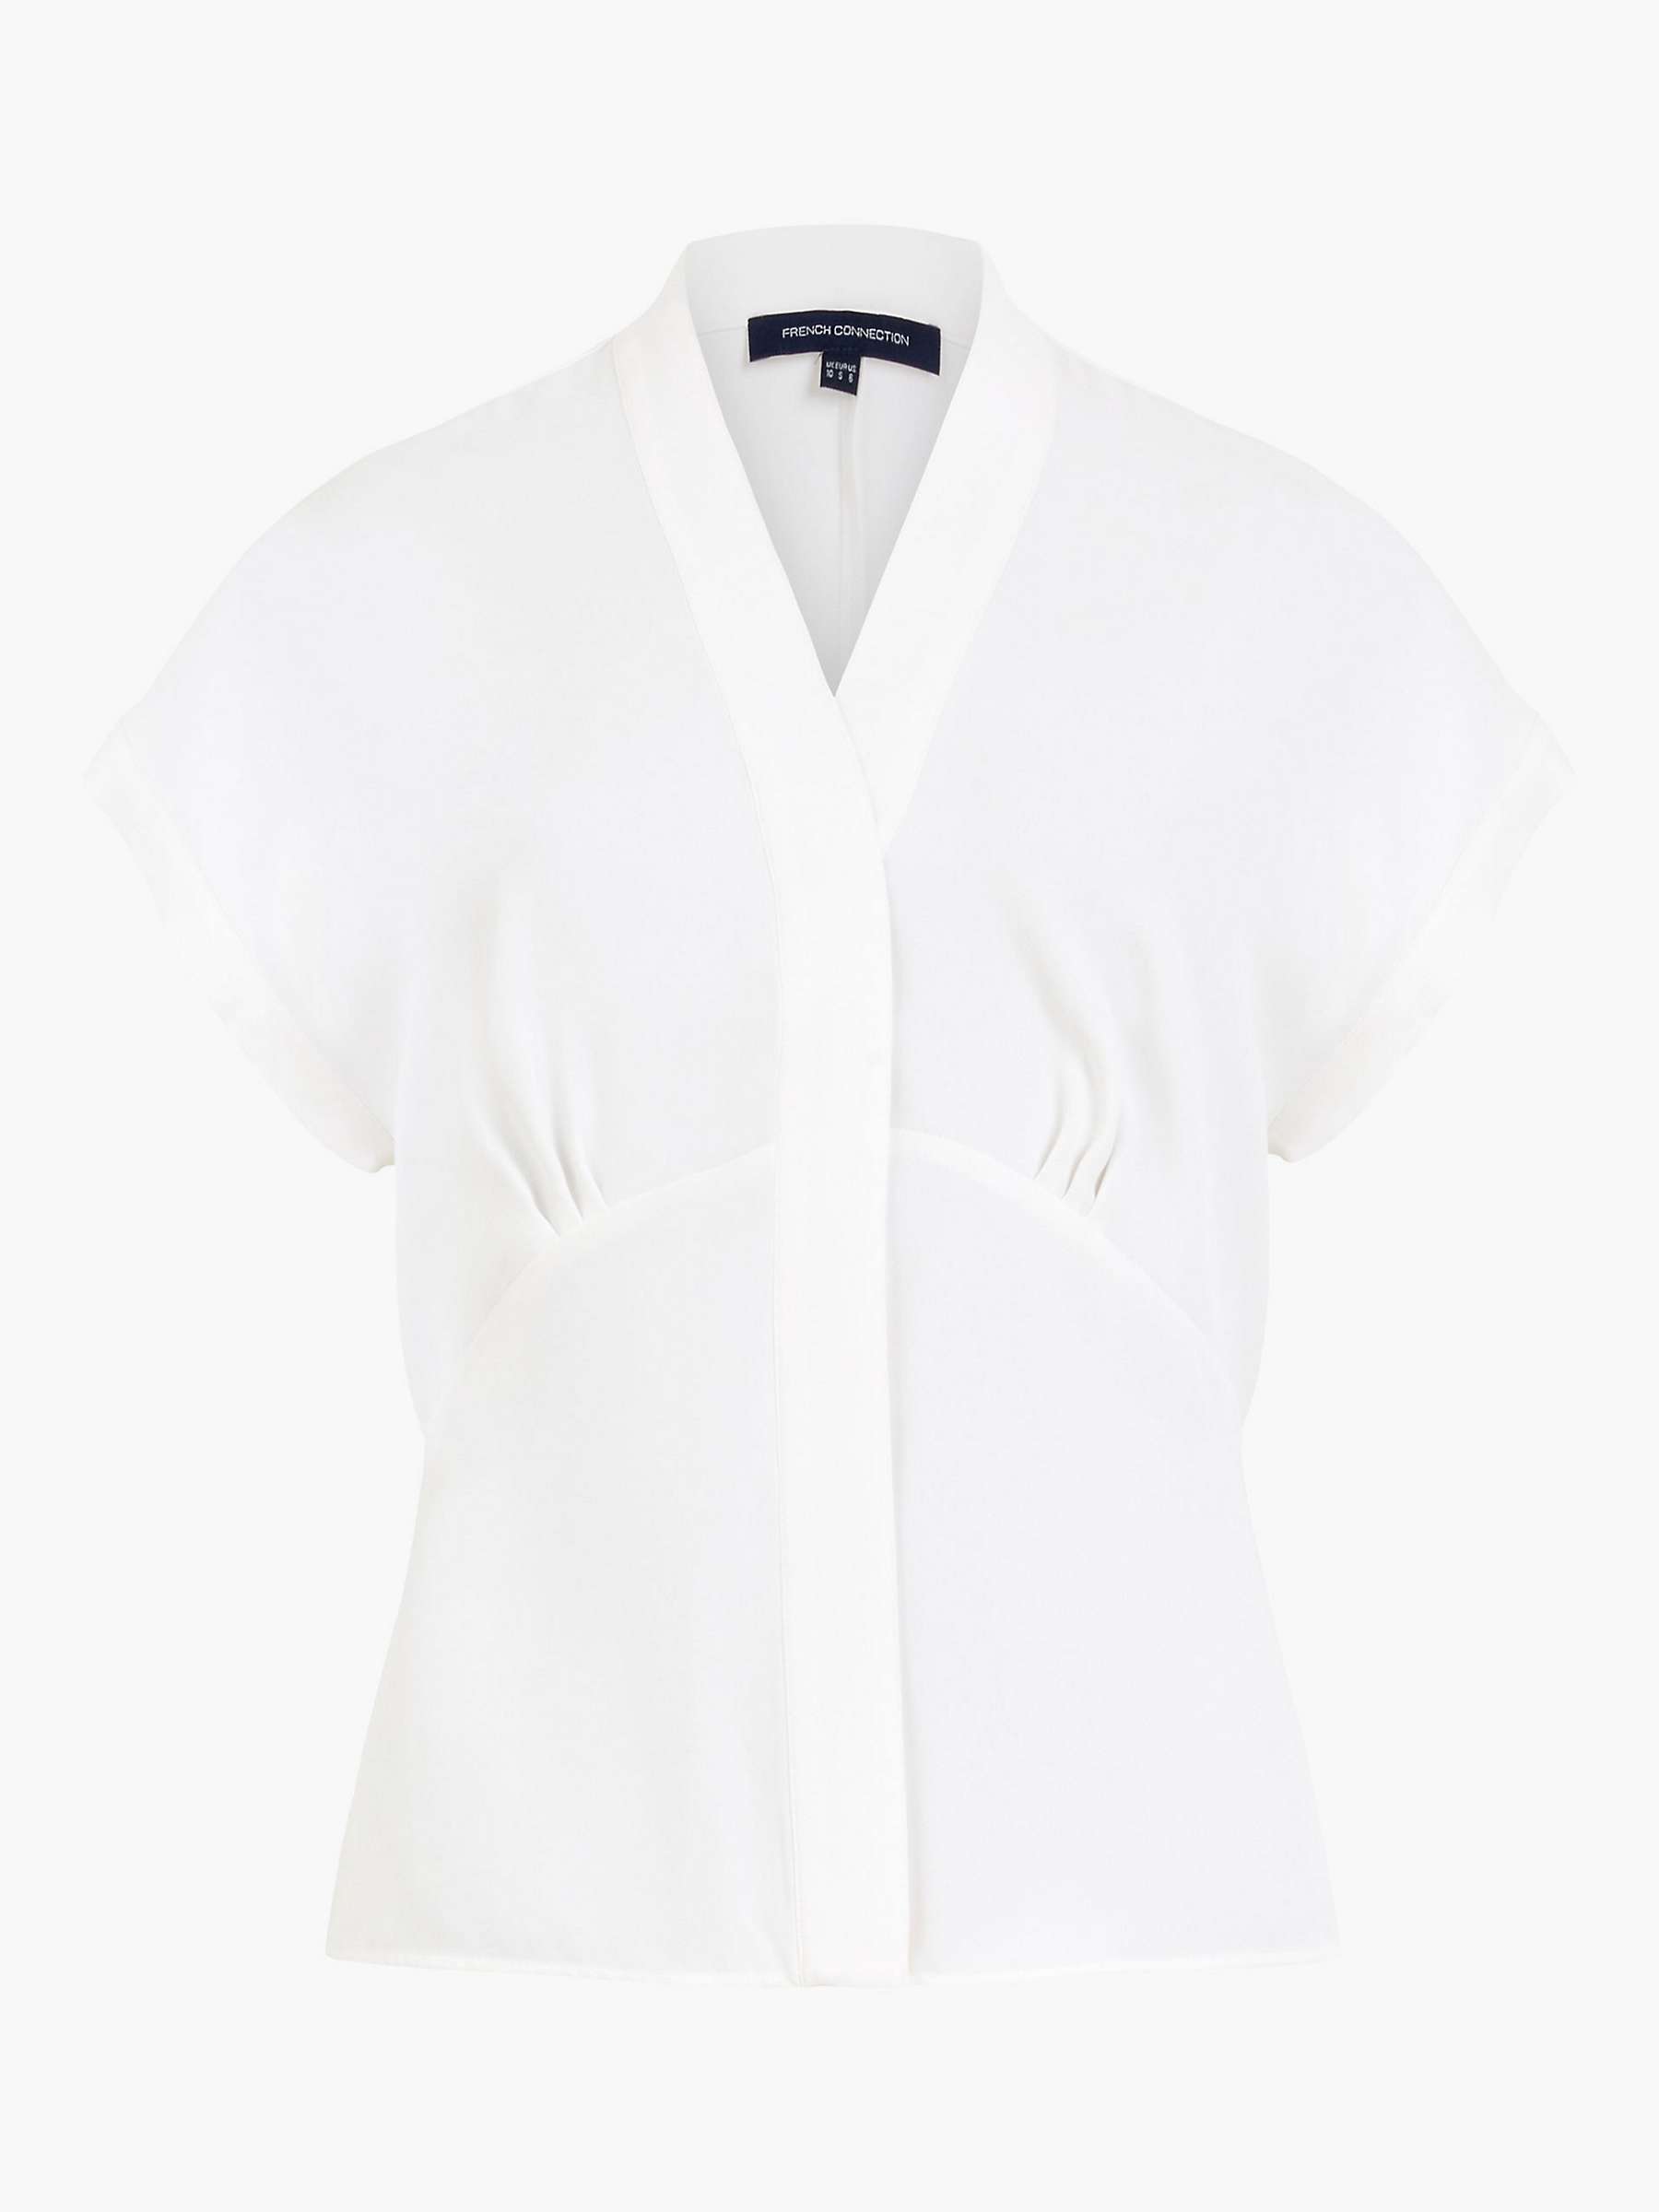 Buy French Connection Carmen Crepe Blouse Online at johnlewis.com